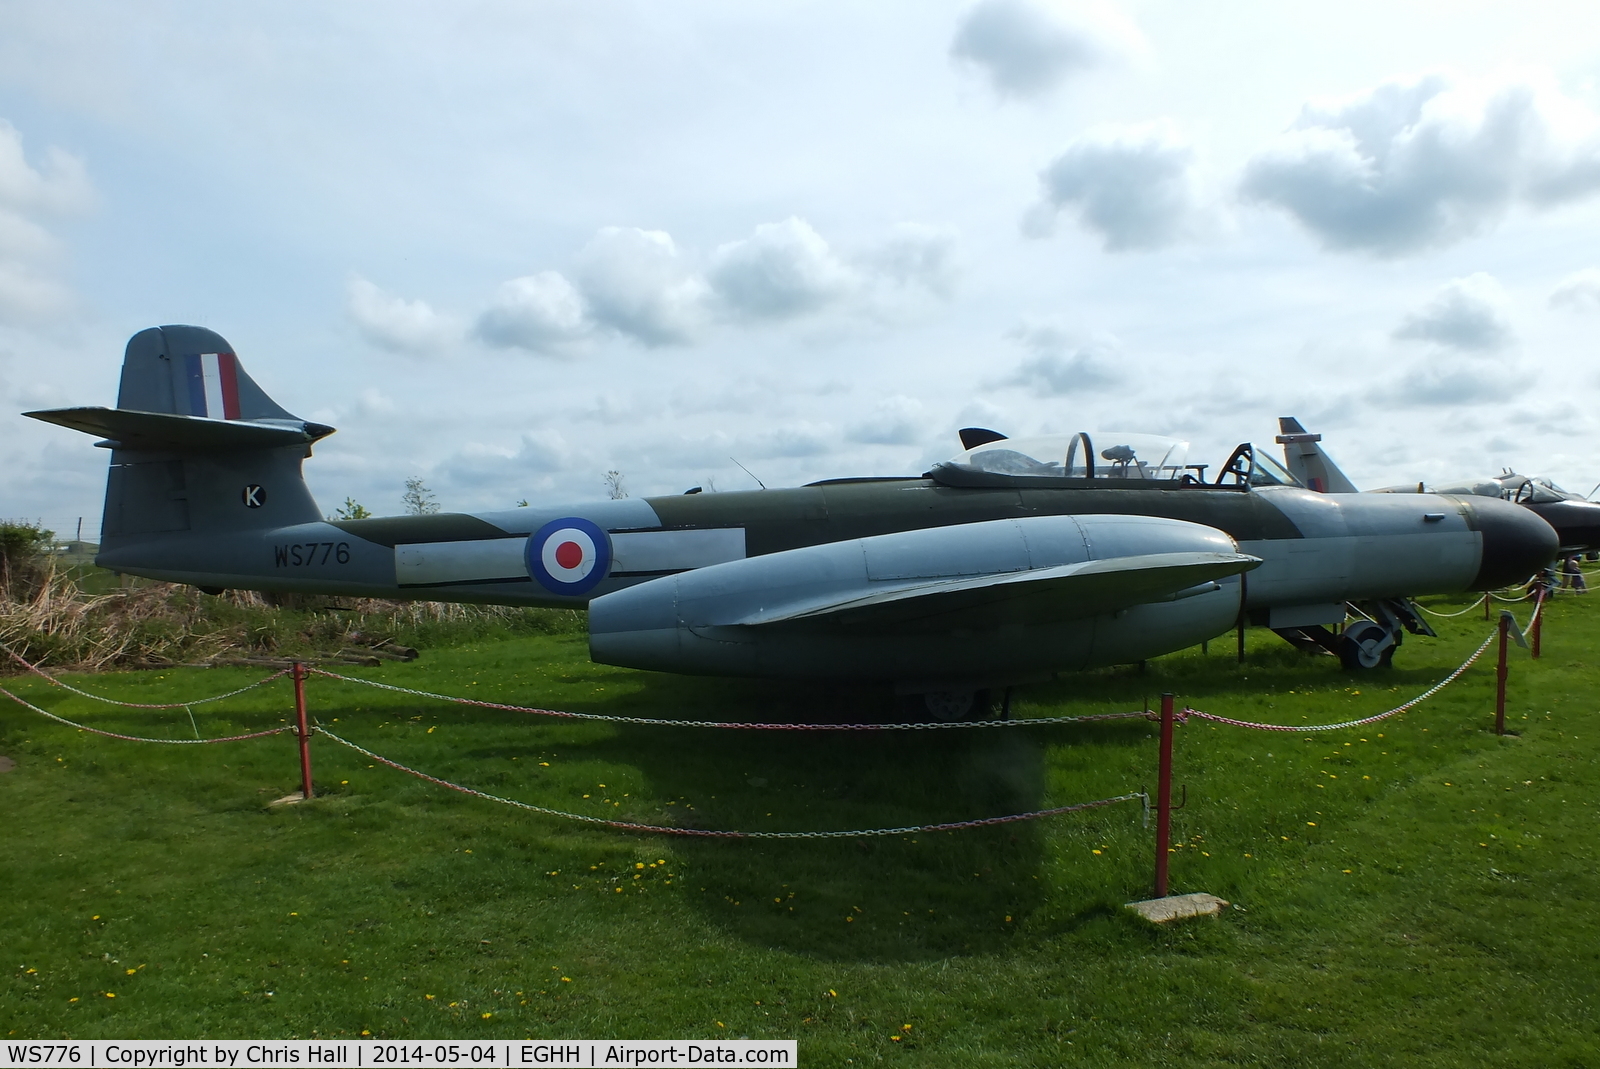 WS776, 1954 Gloster Meteor NF.14 C/N Not found WS776, at the Bournemouth Aviaton Museum